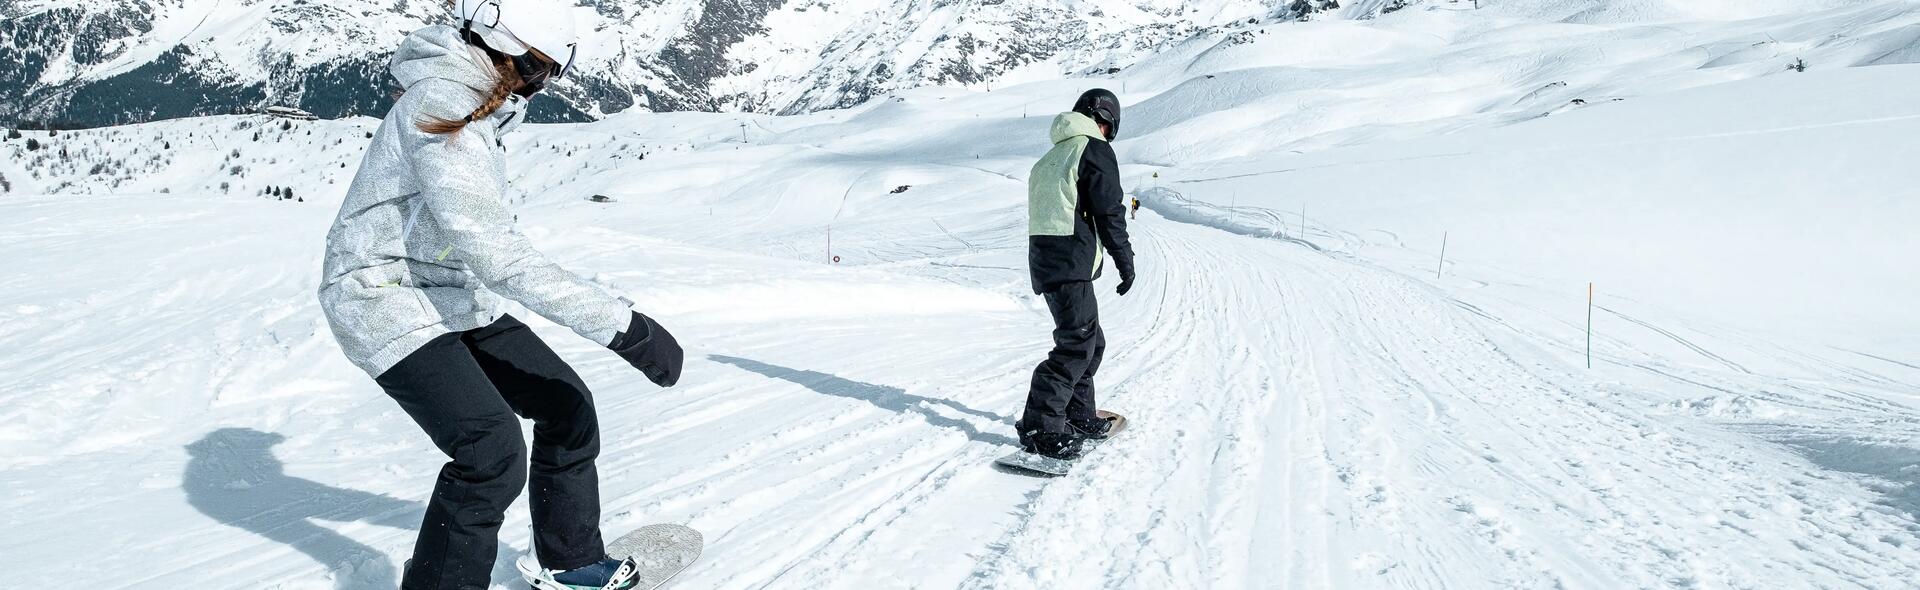 How to choose a snowboard